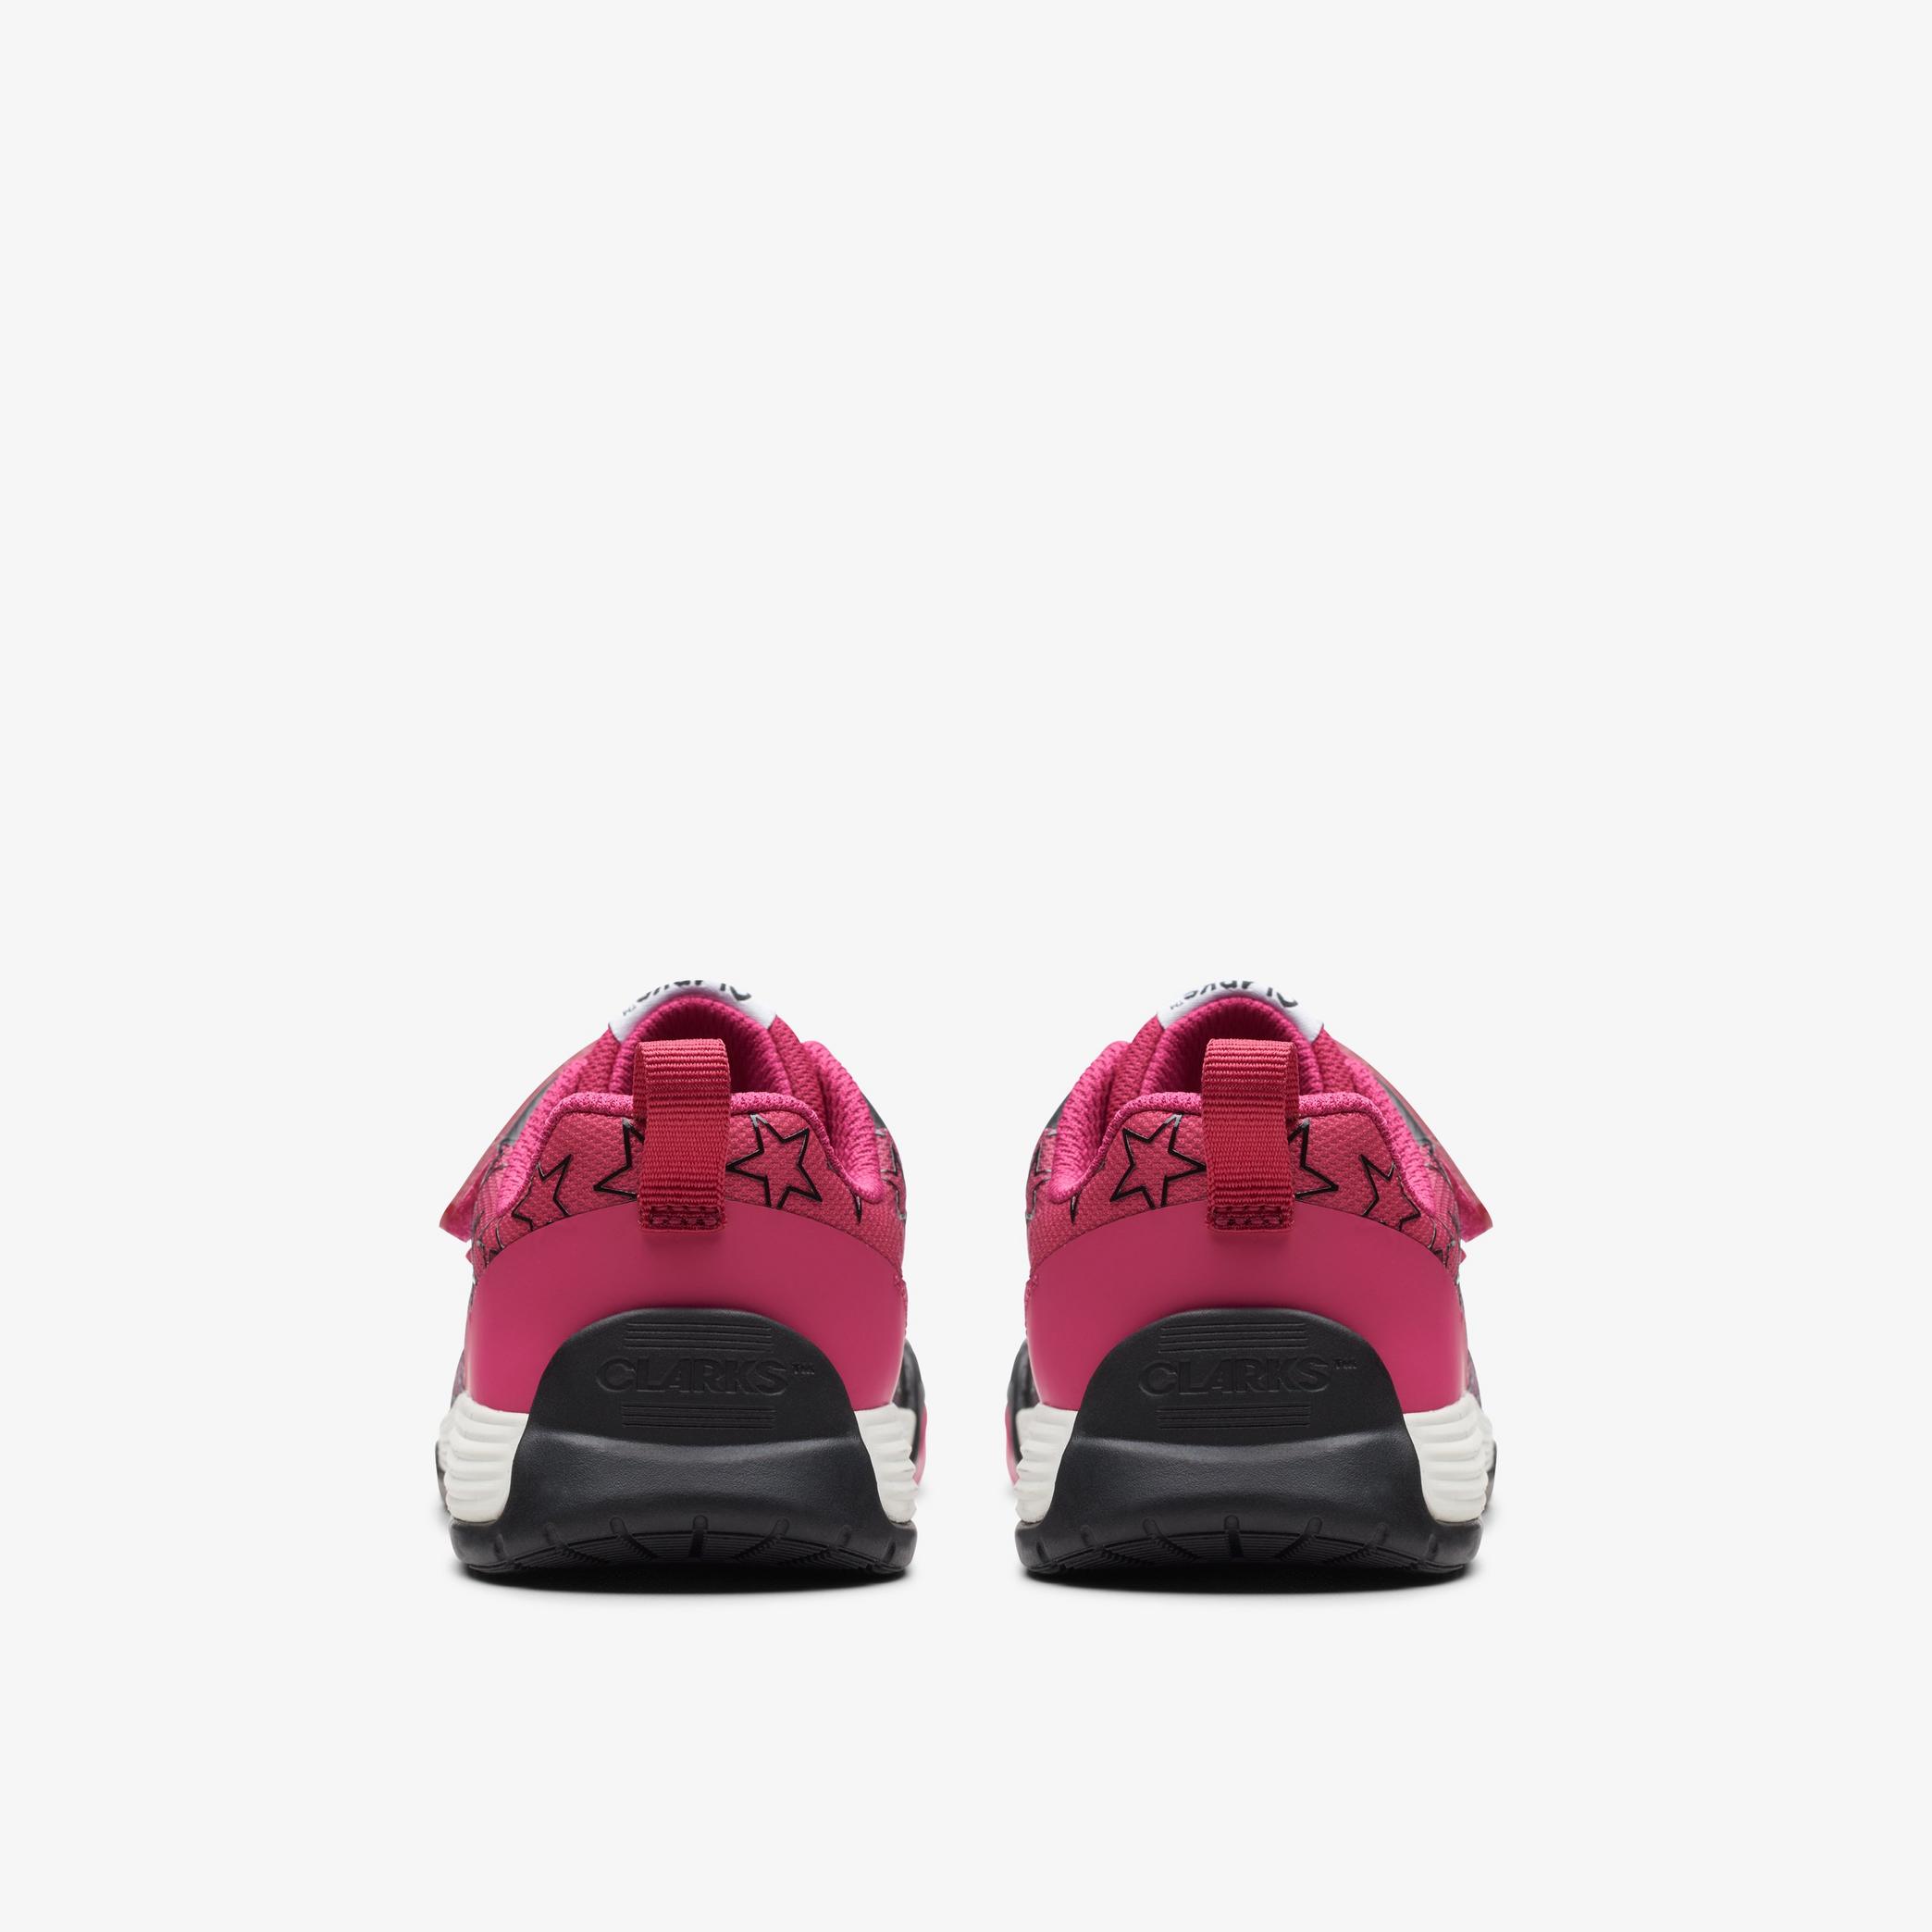 Girls CICA Star Run Kid Pink Combination Synthetic Trainers | Clarks UK